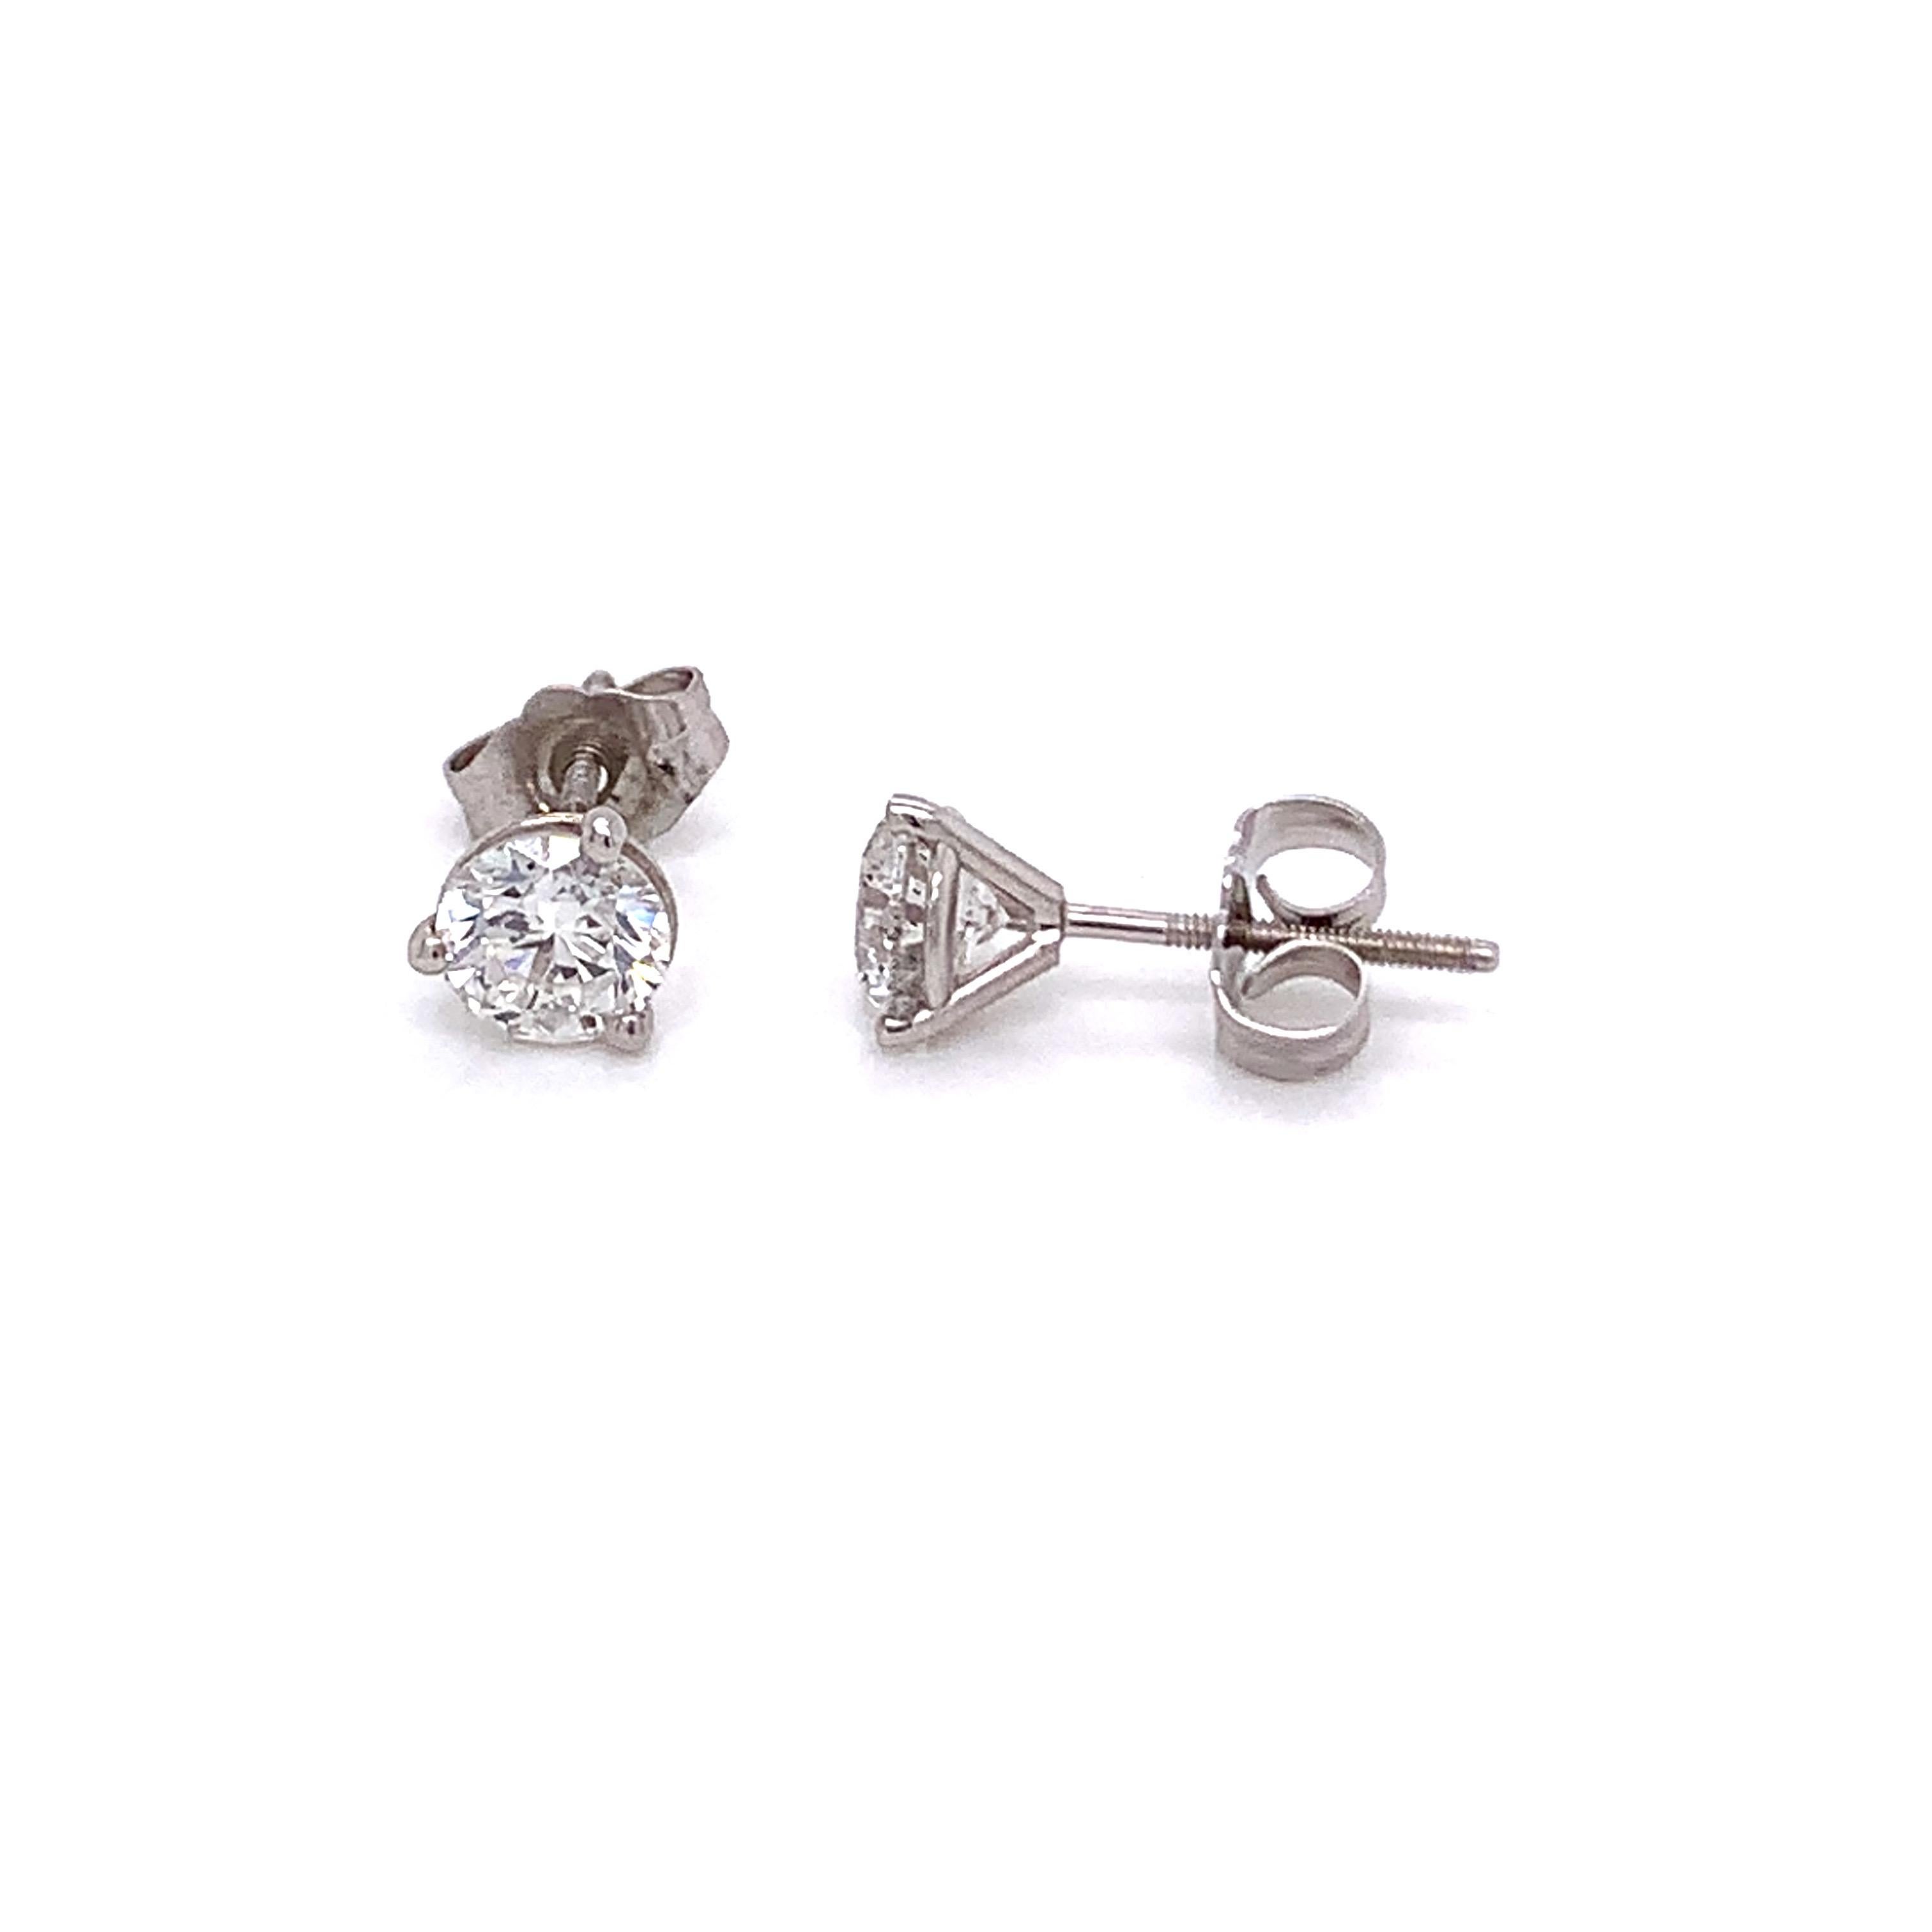 Classic Diamond Stud Earrings made with real/natural brilliant cut diamonds. Total Diamond Weight: 1.05cts. Diamond Quantity: 2 round diamonds. Color: F-G. Clarity: SI2-SI3. Mounted on 18kt white gold screw back setting.